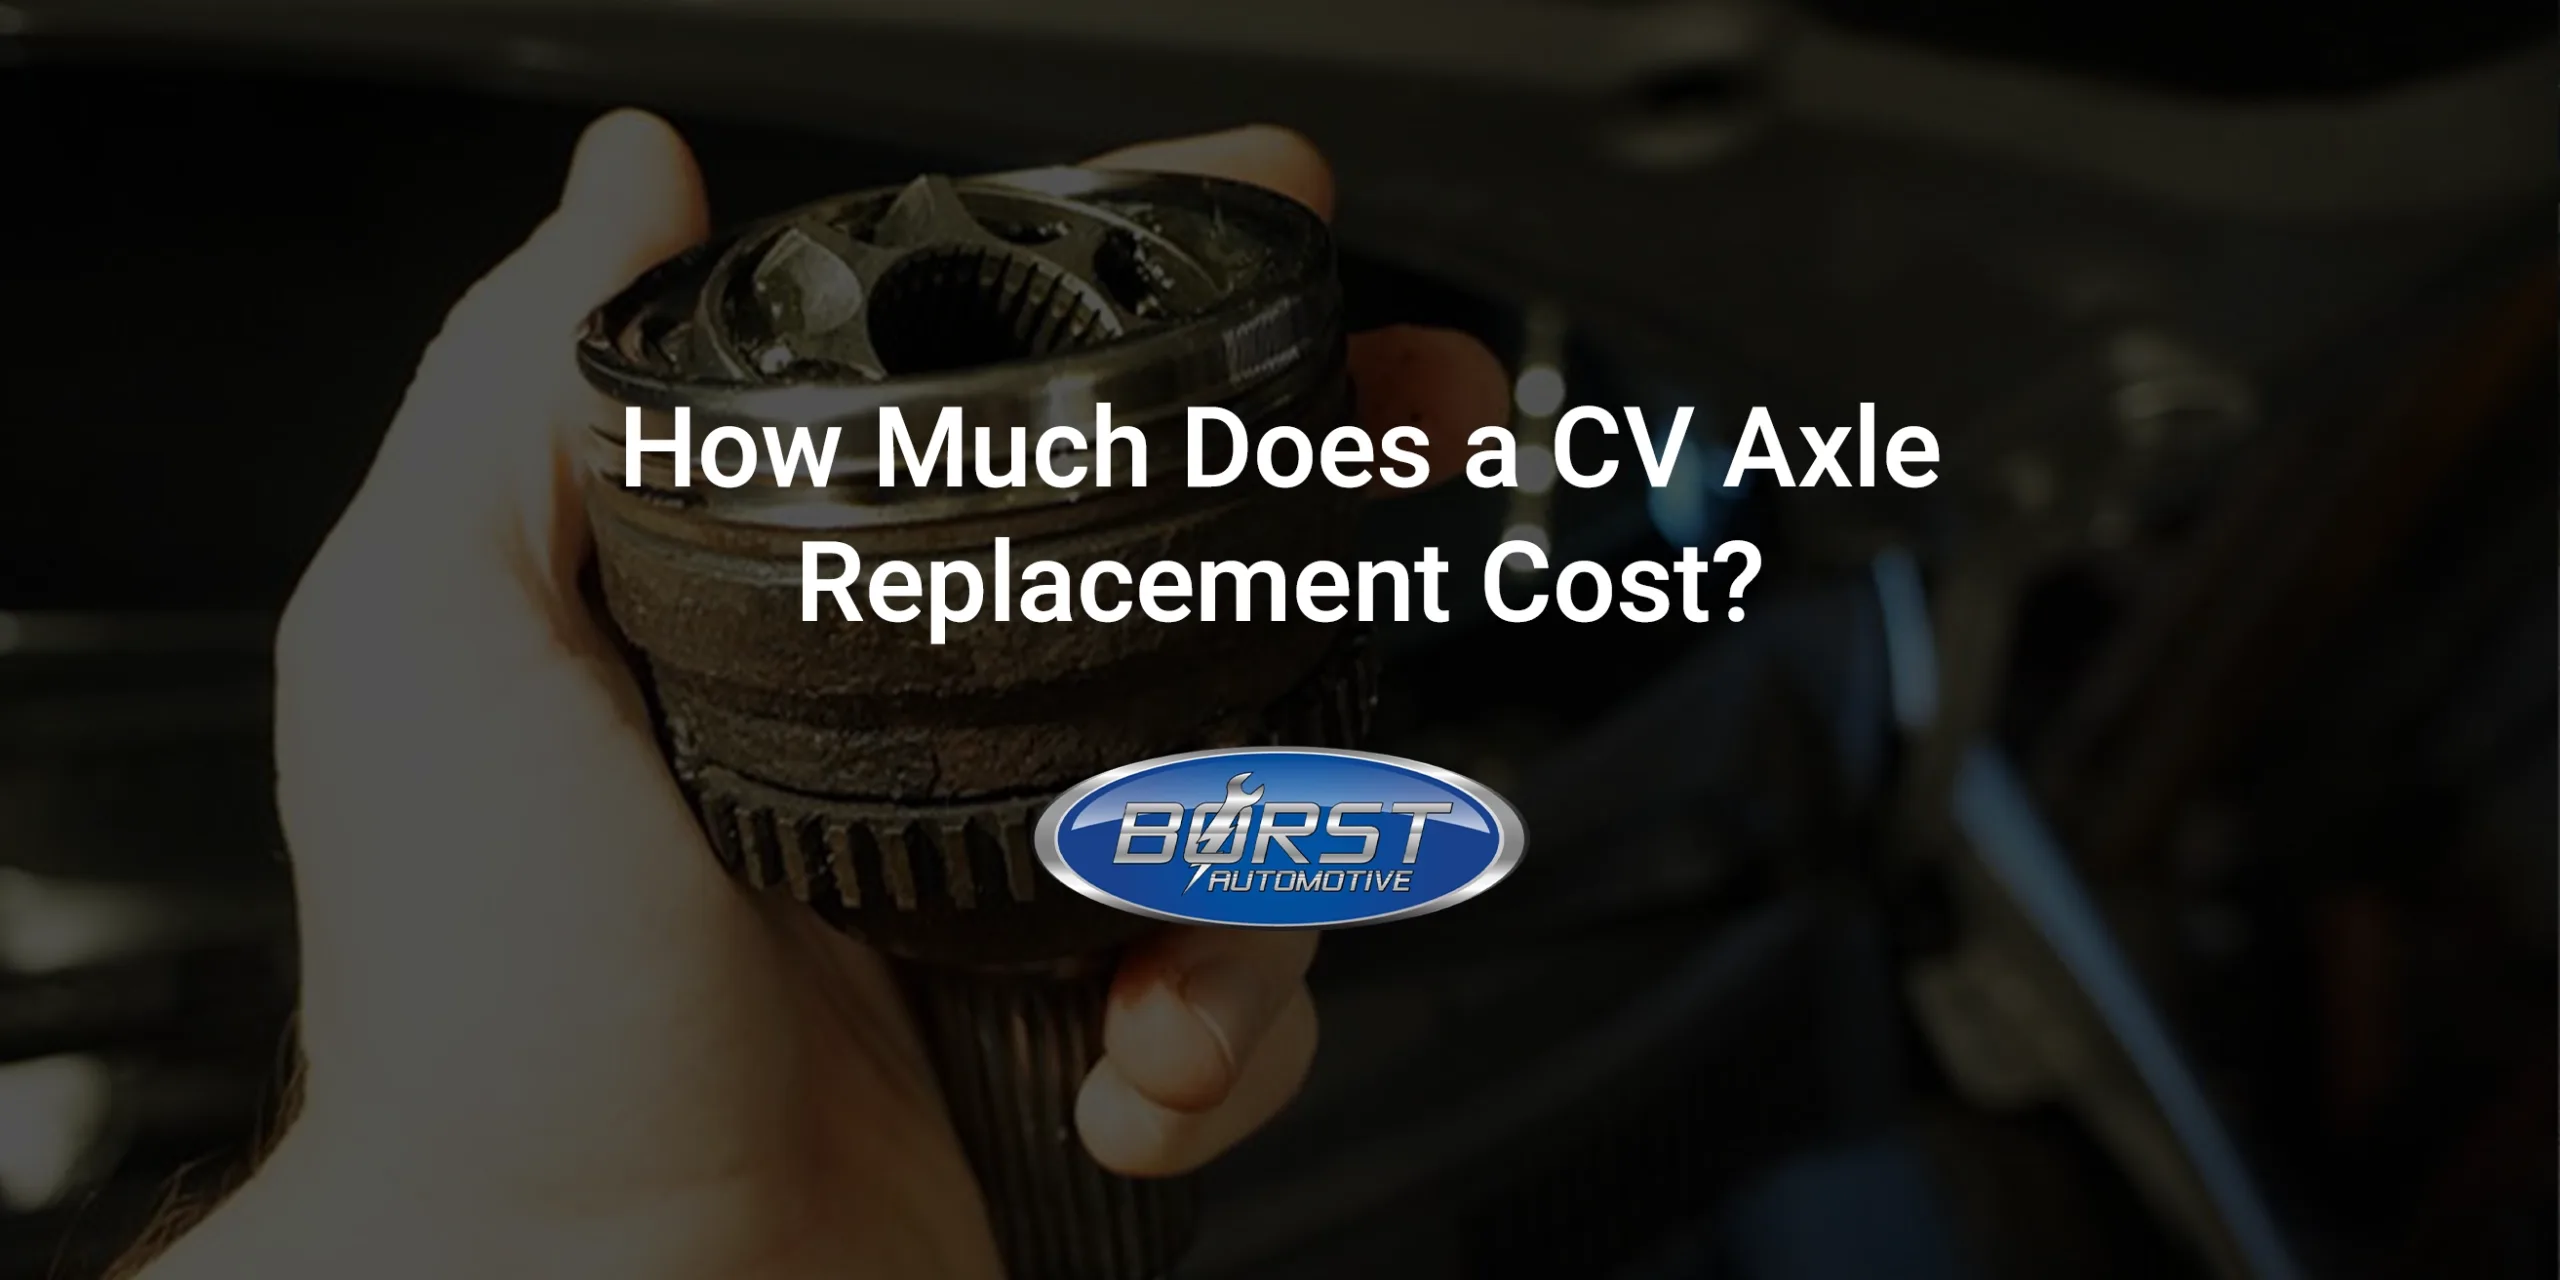 Cost of CV Axle Replacement